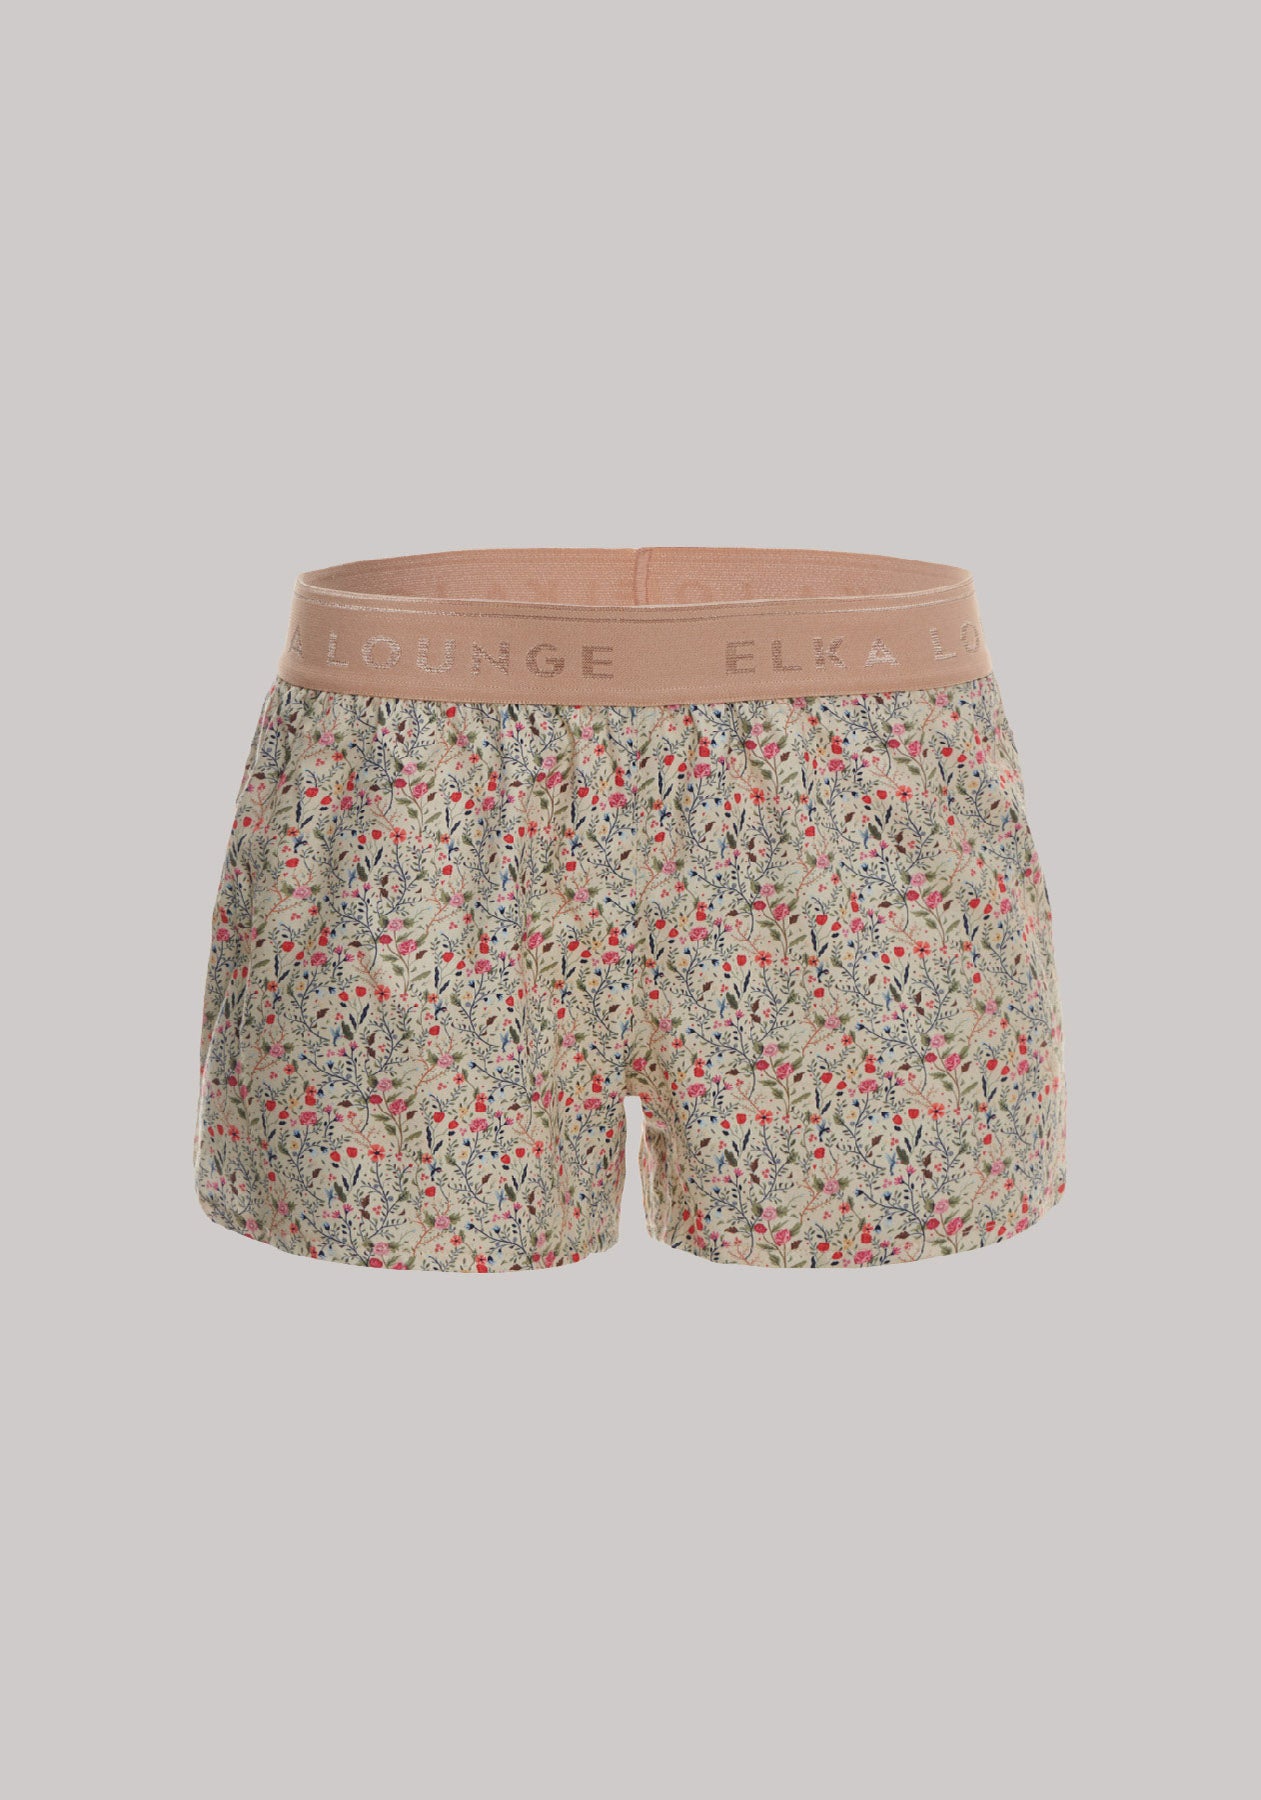 Women's shorts active Beige with flowers